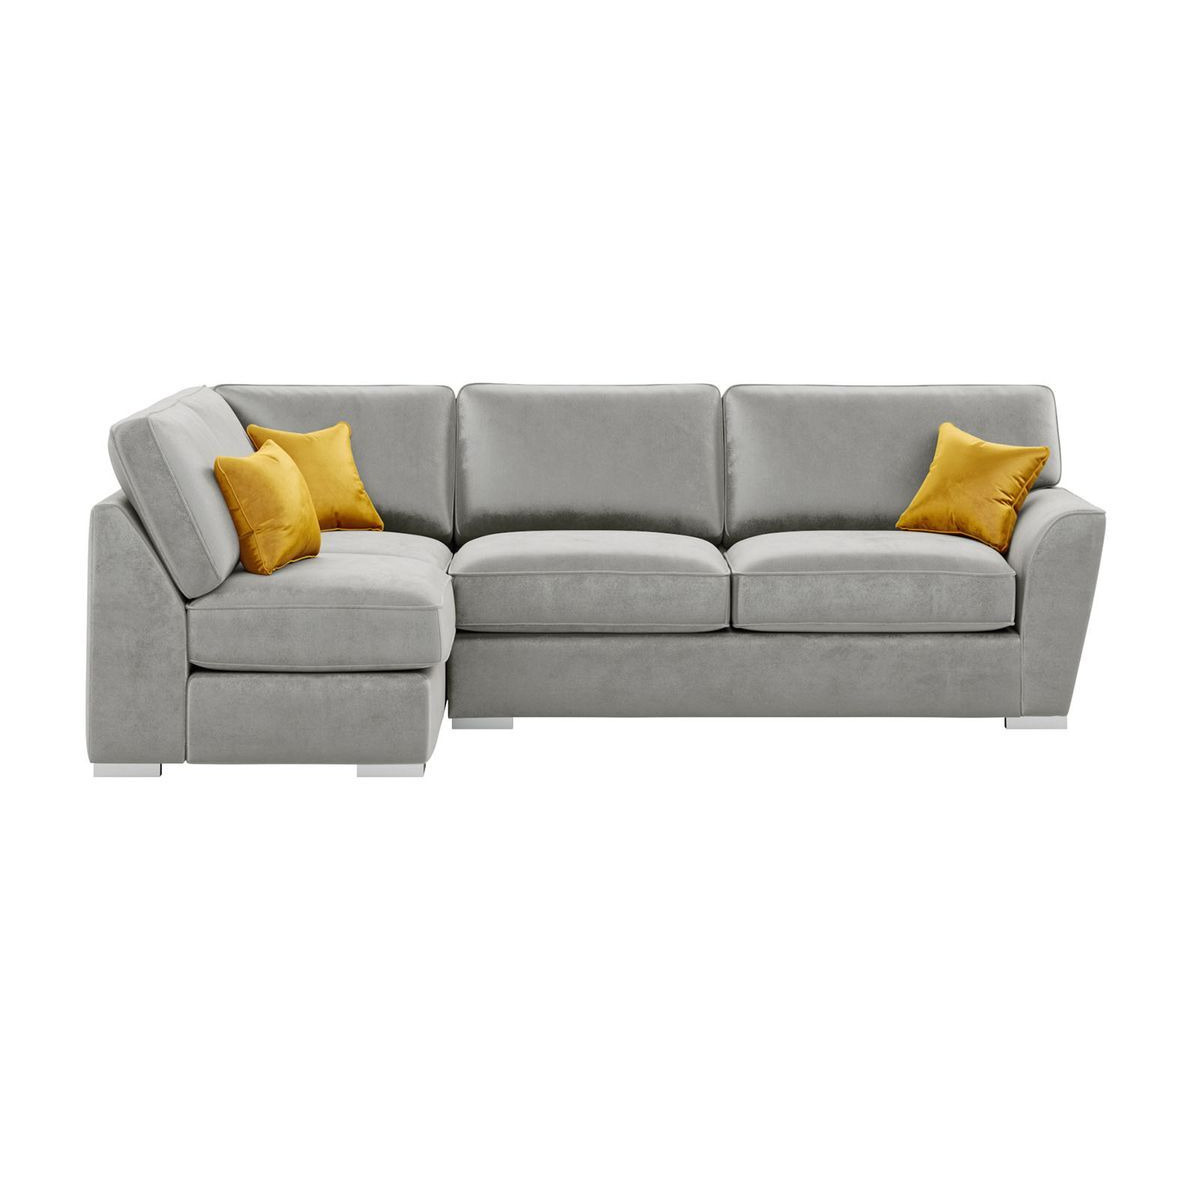 Majestic New Left Hand Corner Sofa with Fitted Back Cushions, silver/mustard - image 1